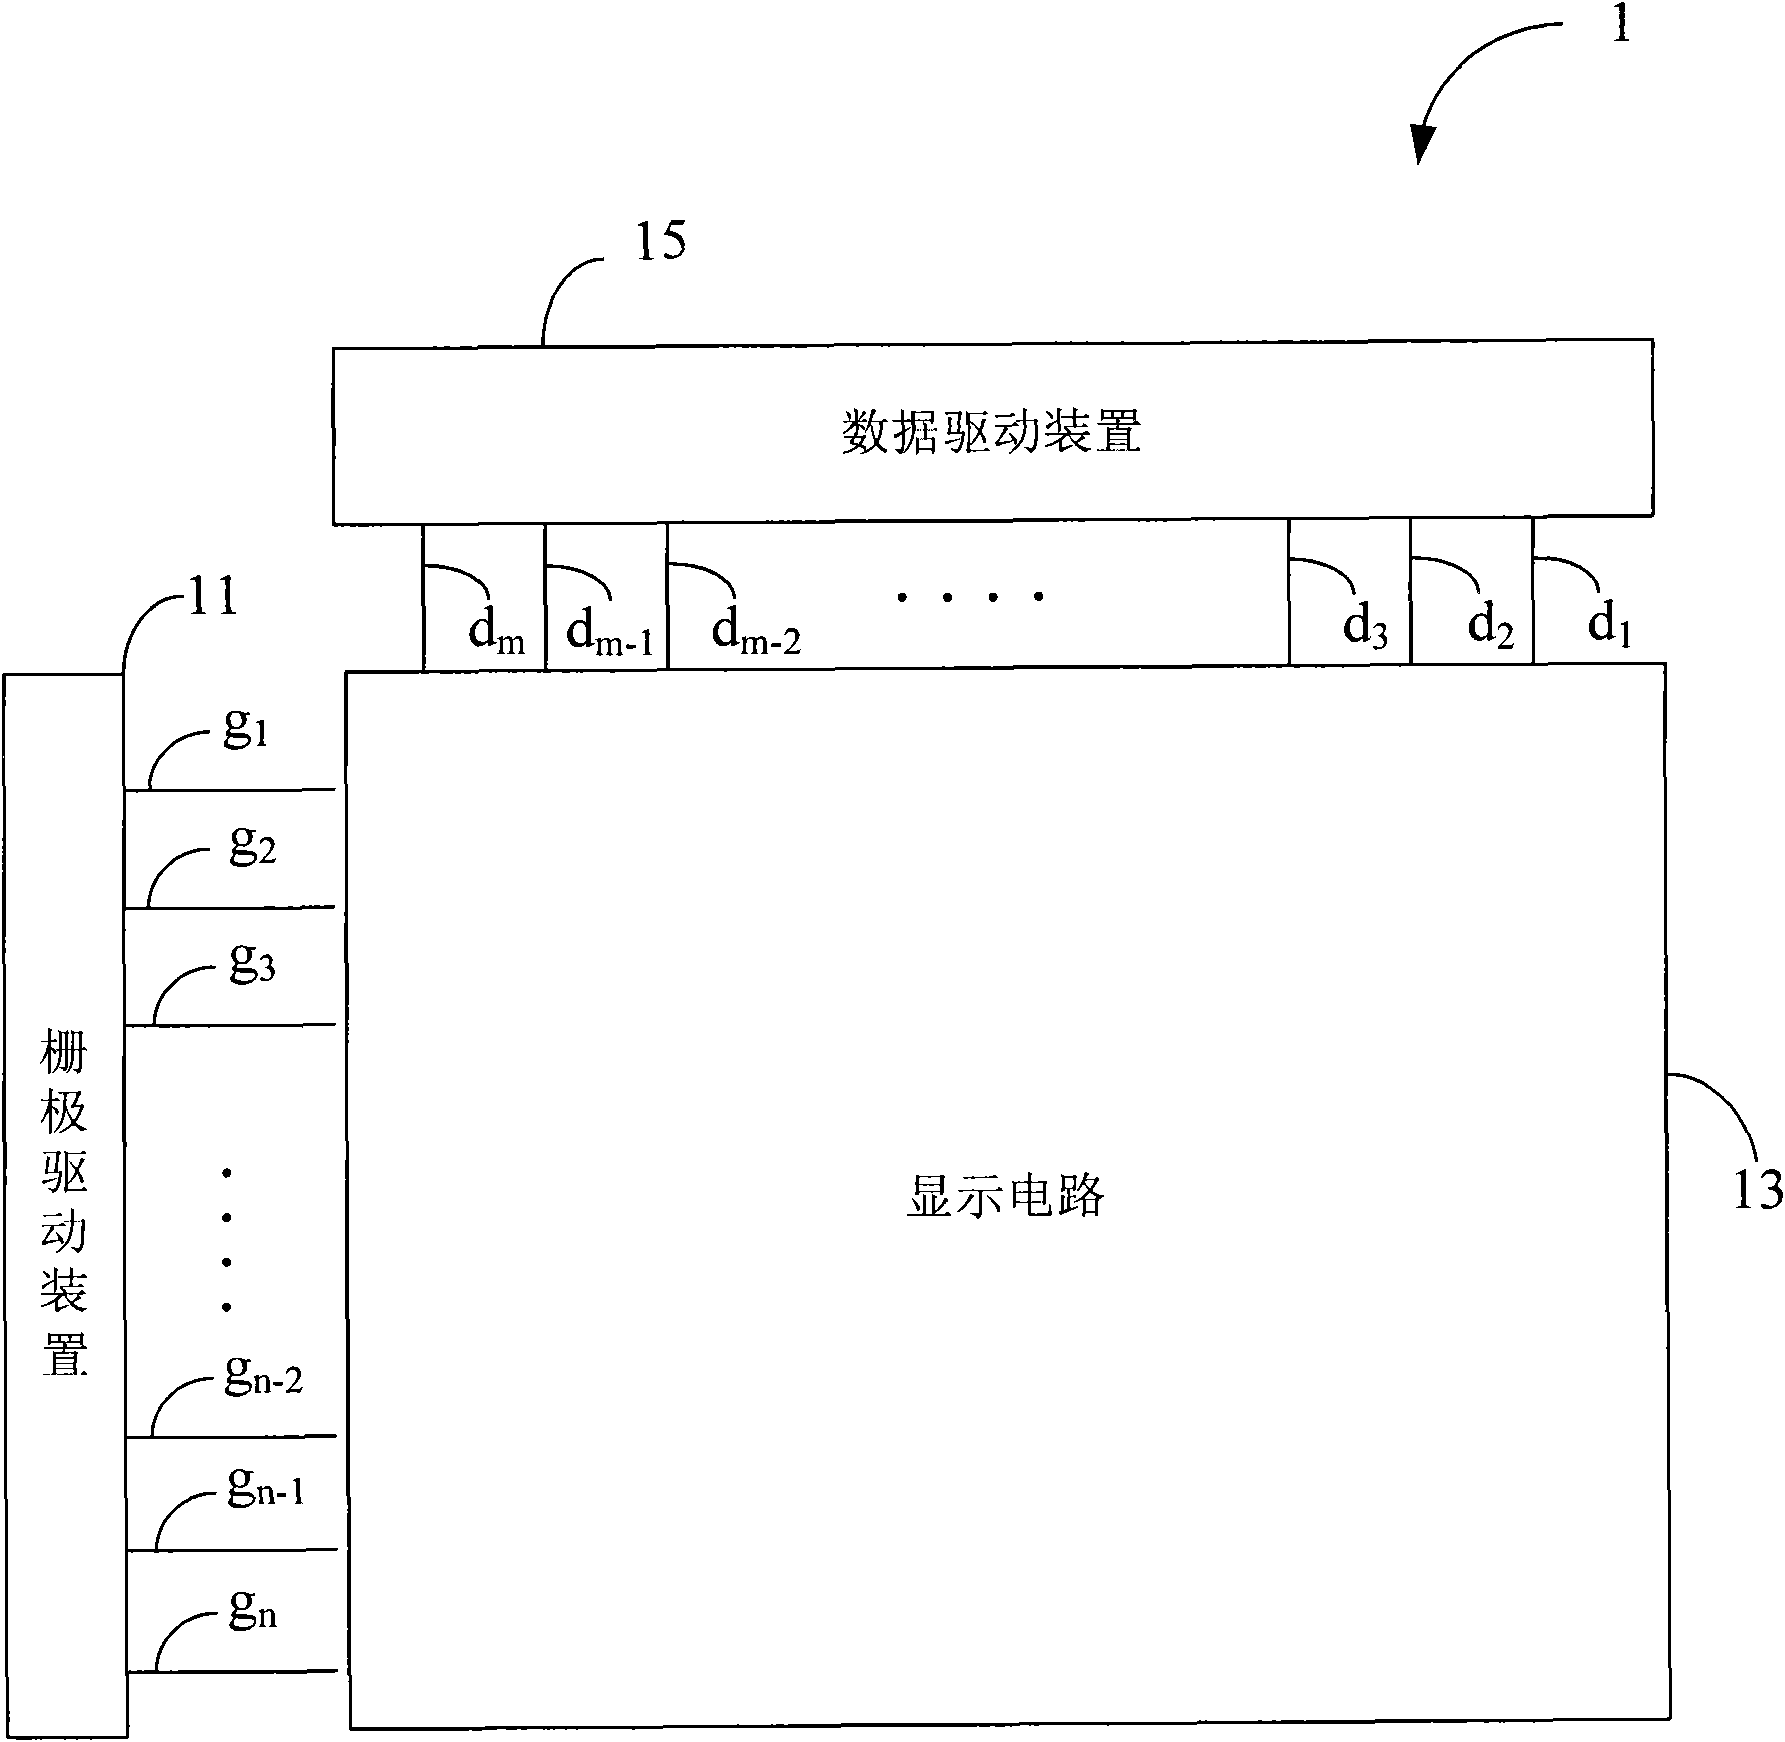 Display circuit for monitor and monitor